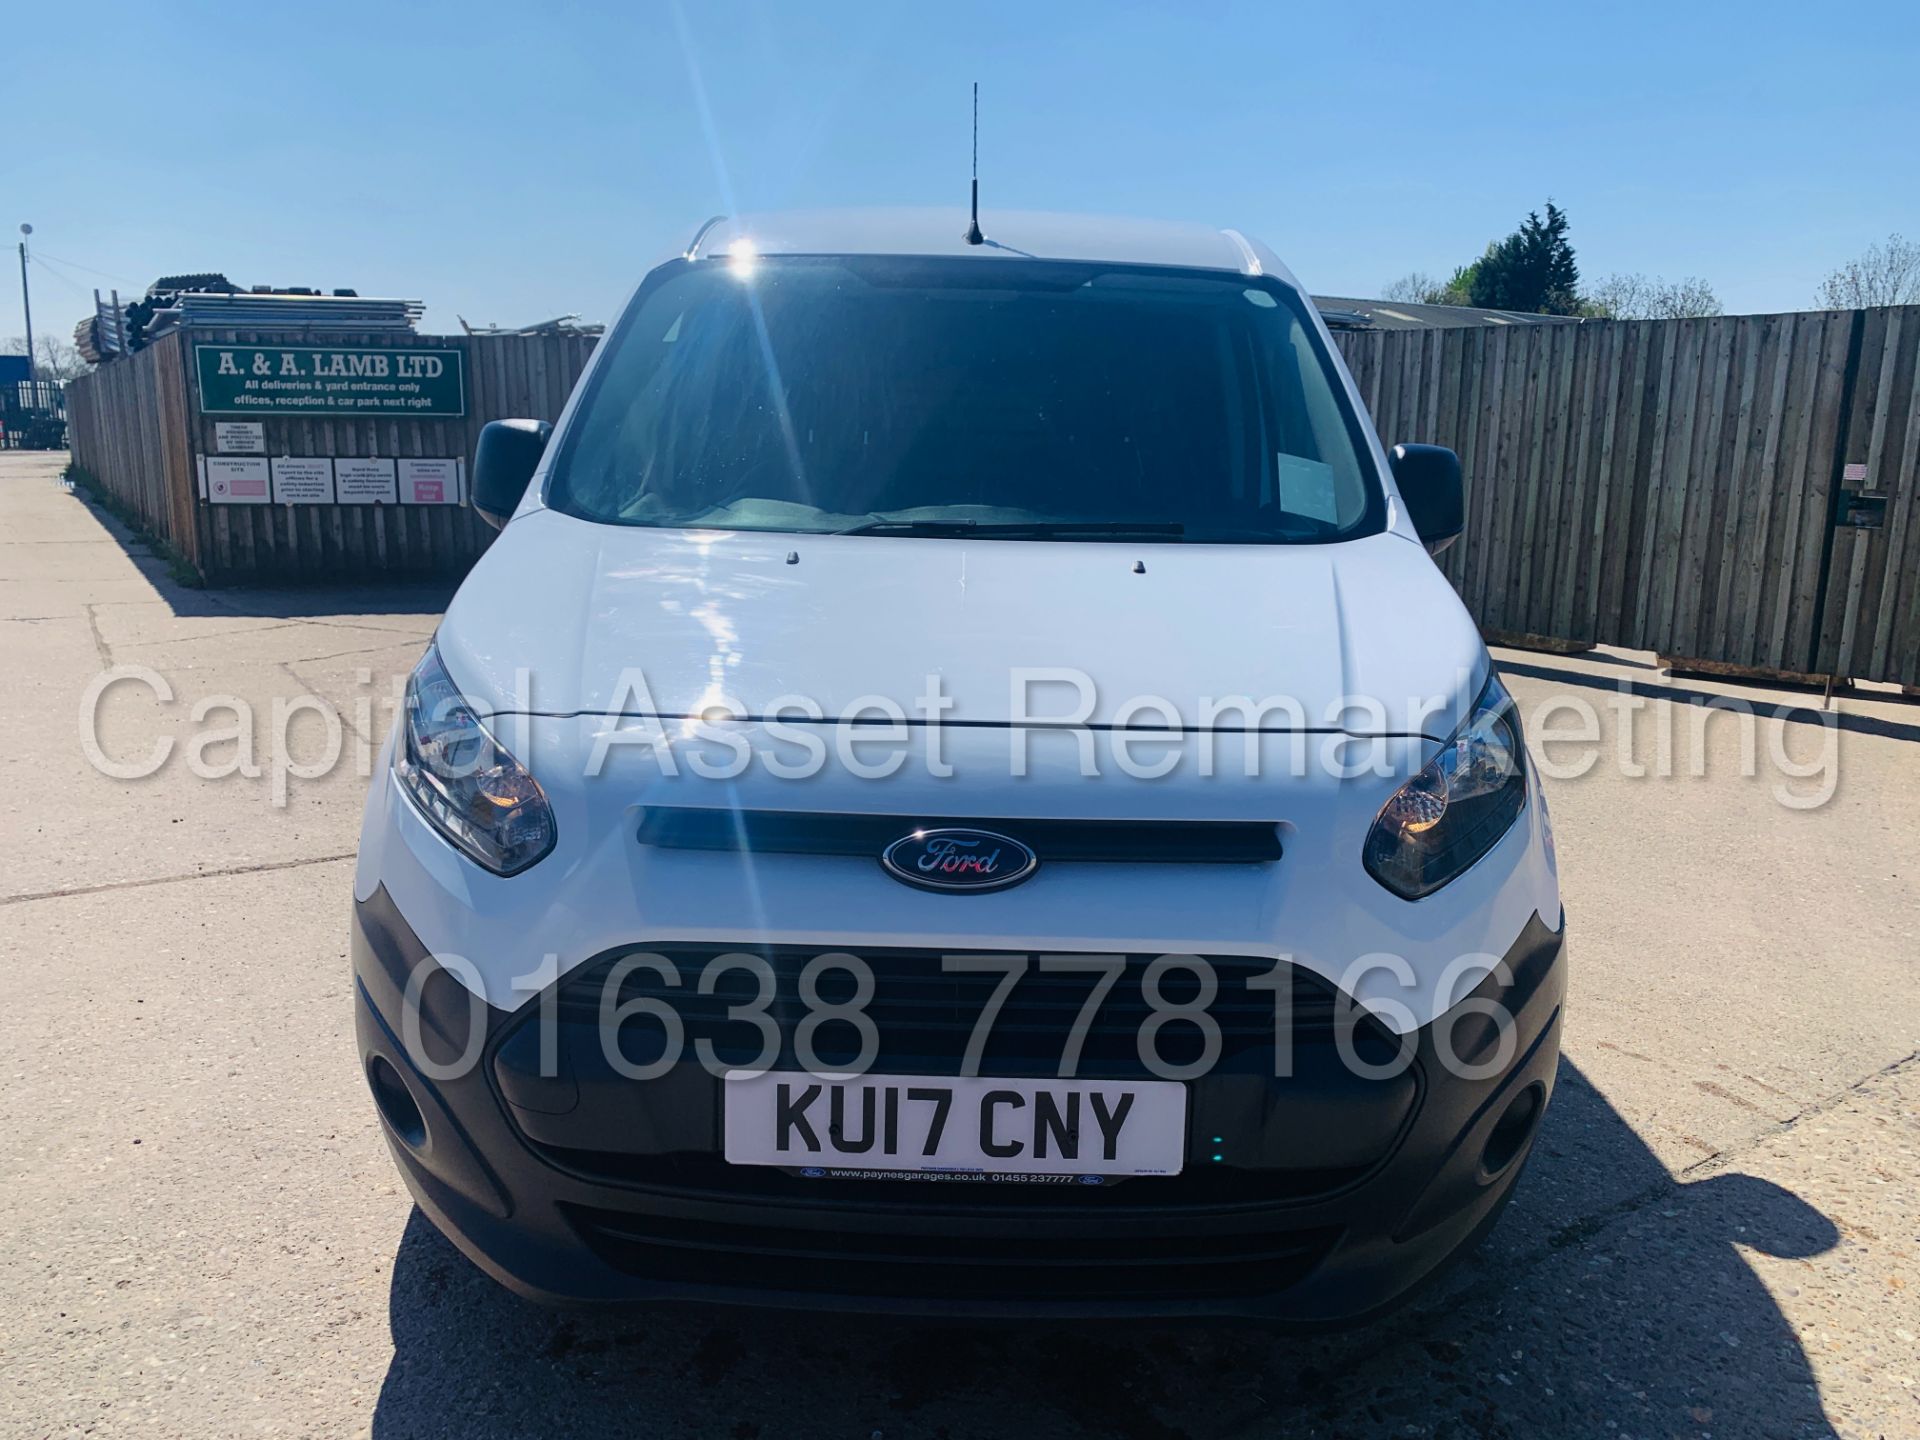 (On Sale) FORD TRANSIT CONNECT *SWB* (2017 - EURO 6) '1.5 TDCI - 6 SPEED' (1 OWNER - FULL HISTORY) - Image 14 of 38